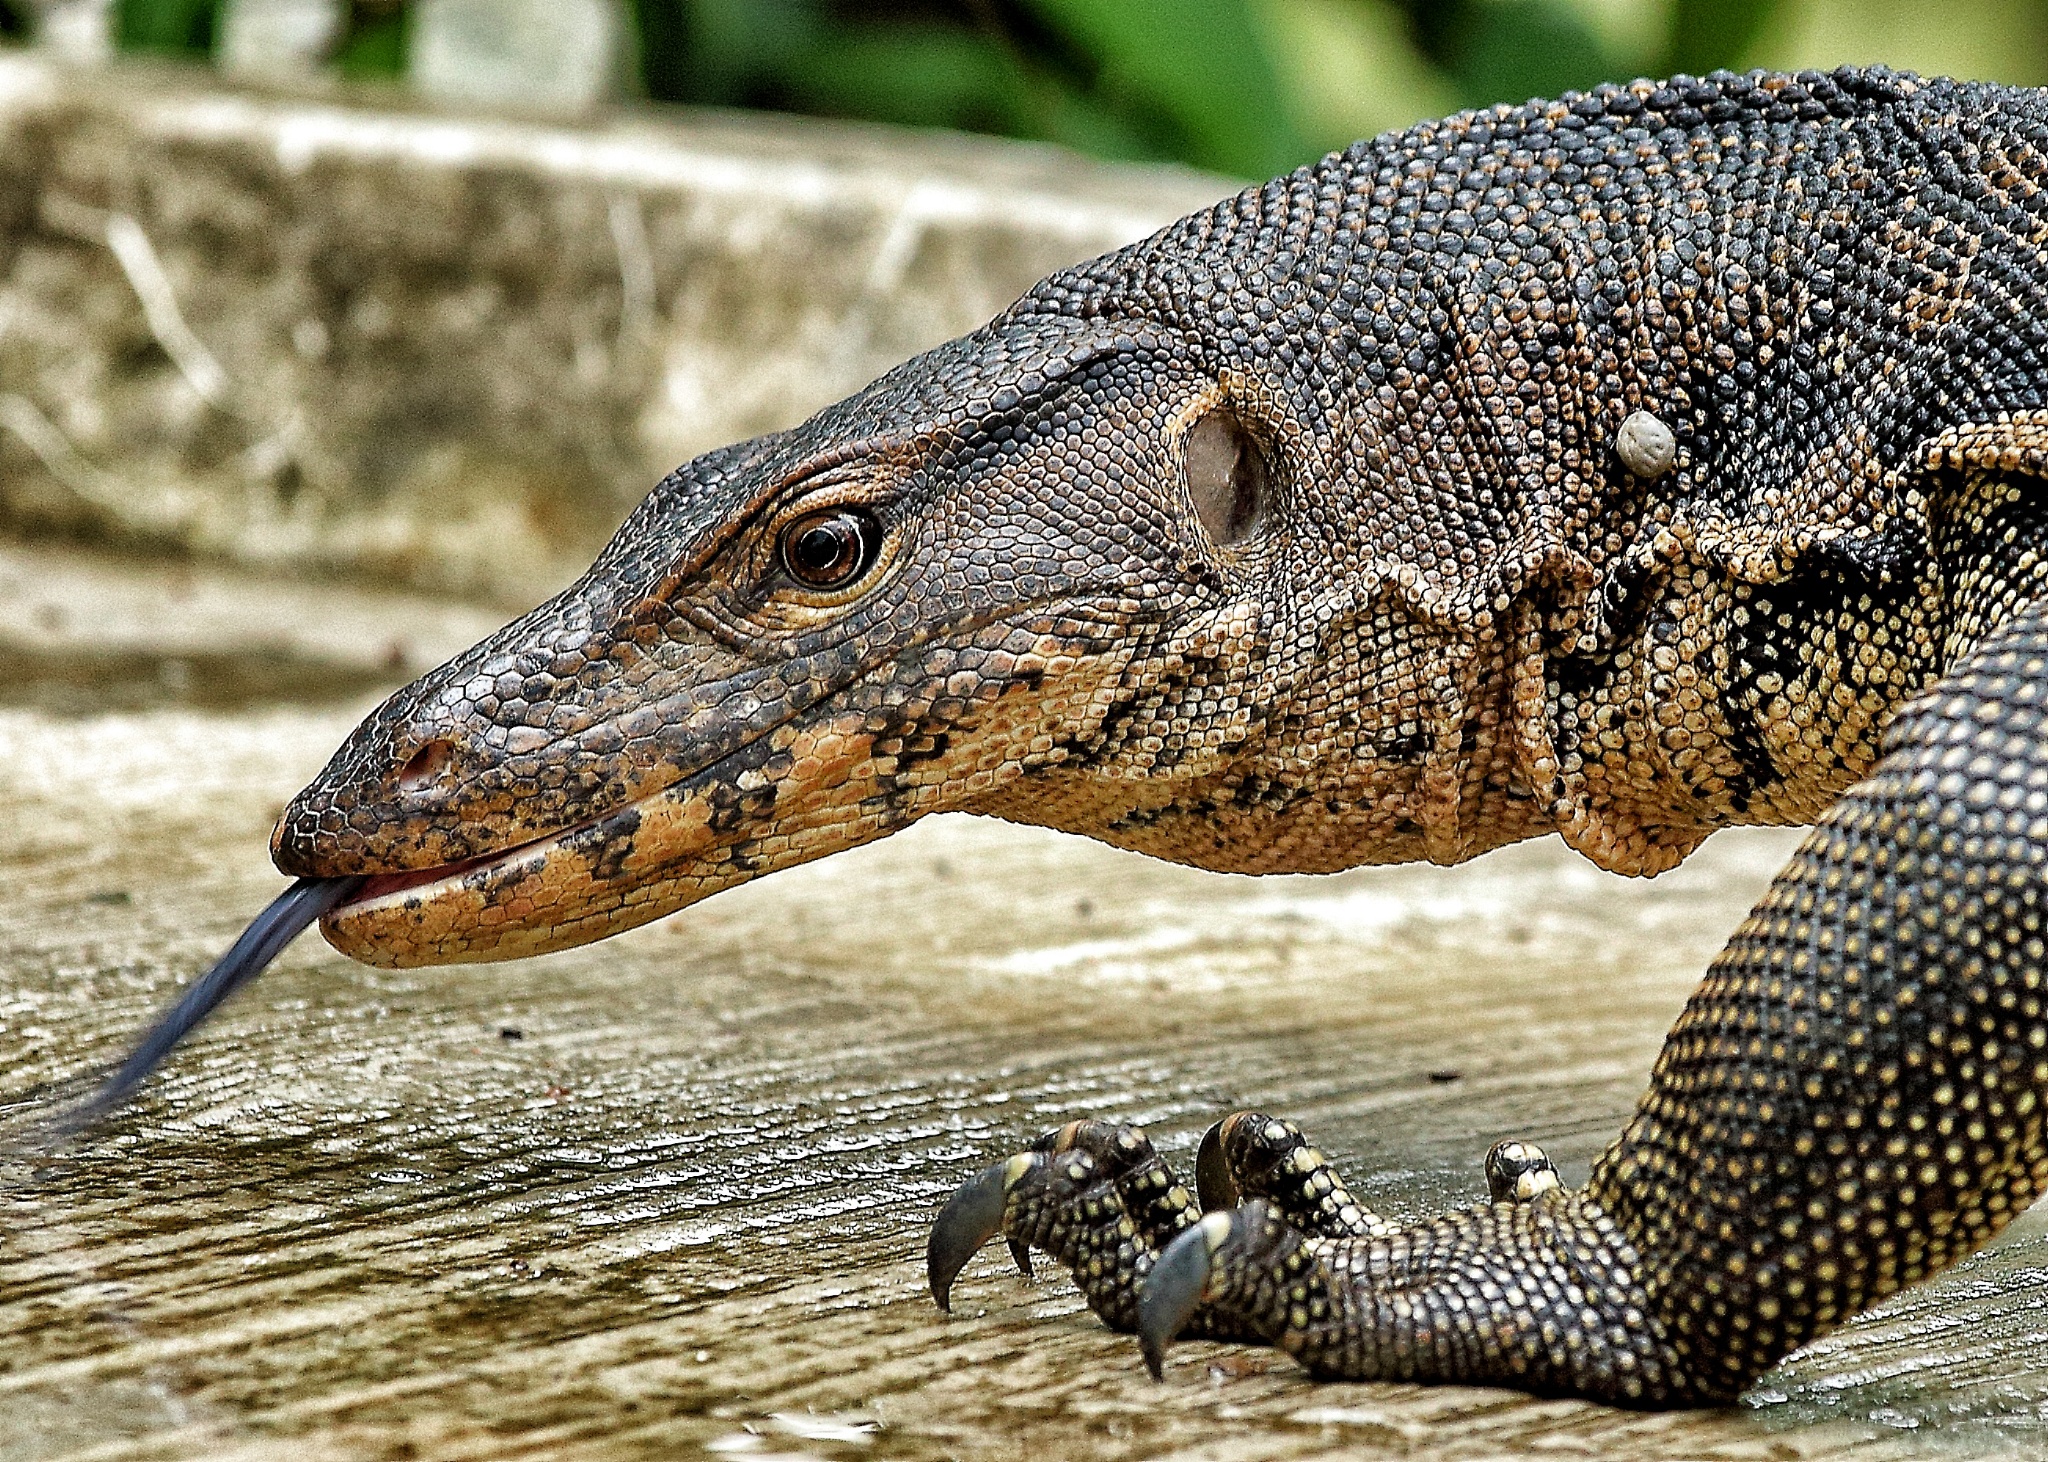 The Water Monitor Lizards of Sungei Buloh - TheSmartLocal